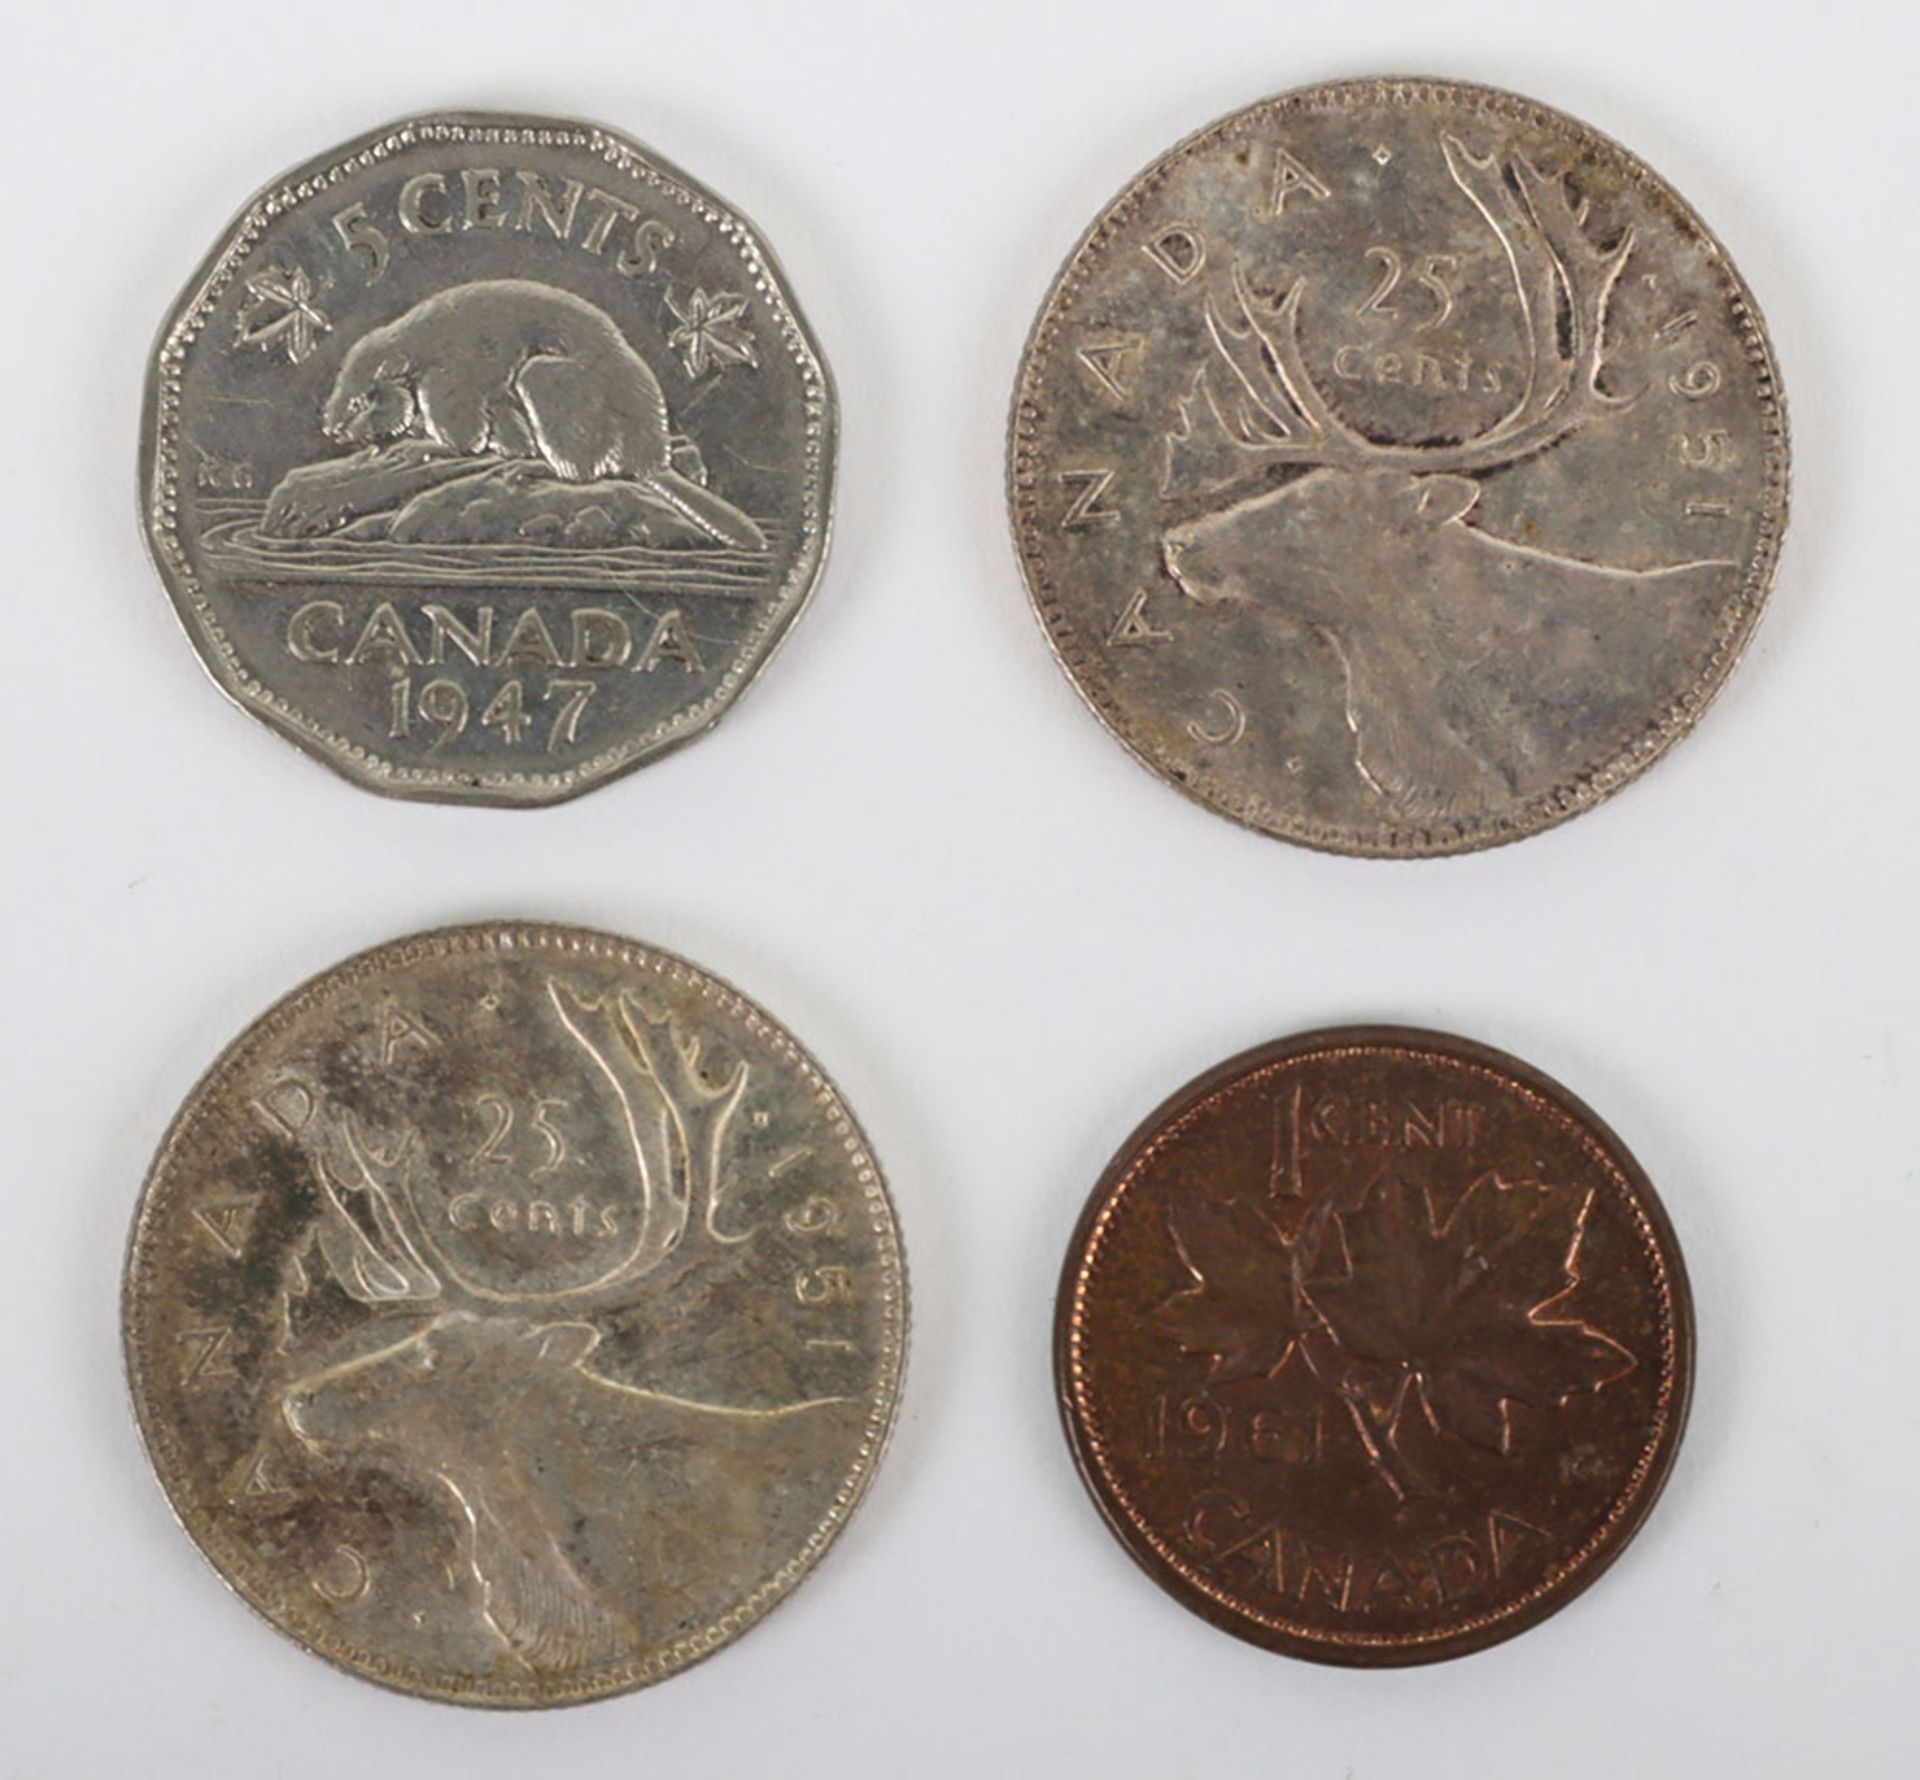 Four Canada prooflike coins, 2x1951 25 Cents, 1947 5 Cents and 1961 1 Cent - Image 2 of 2